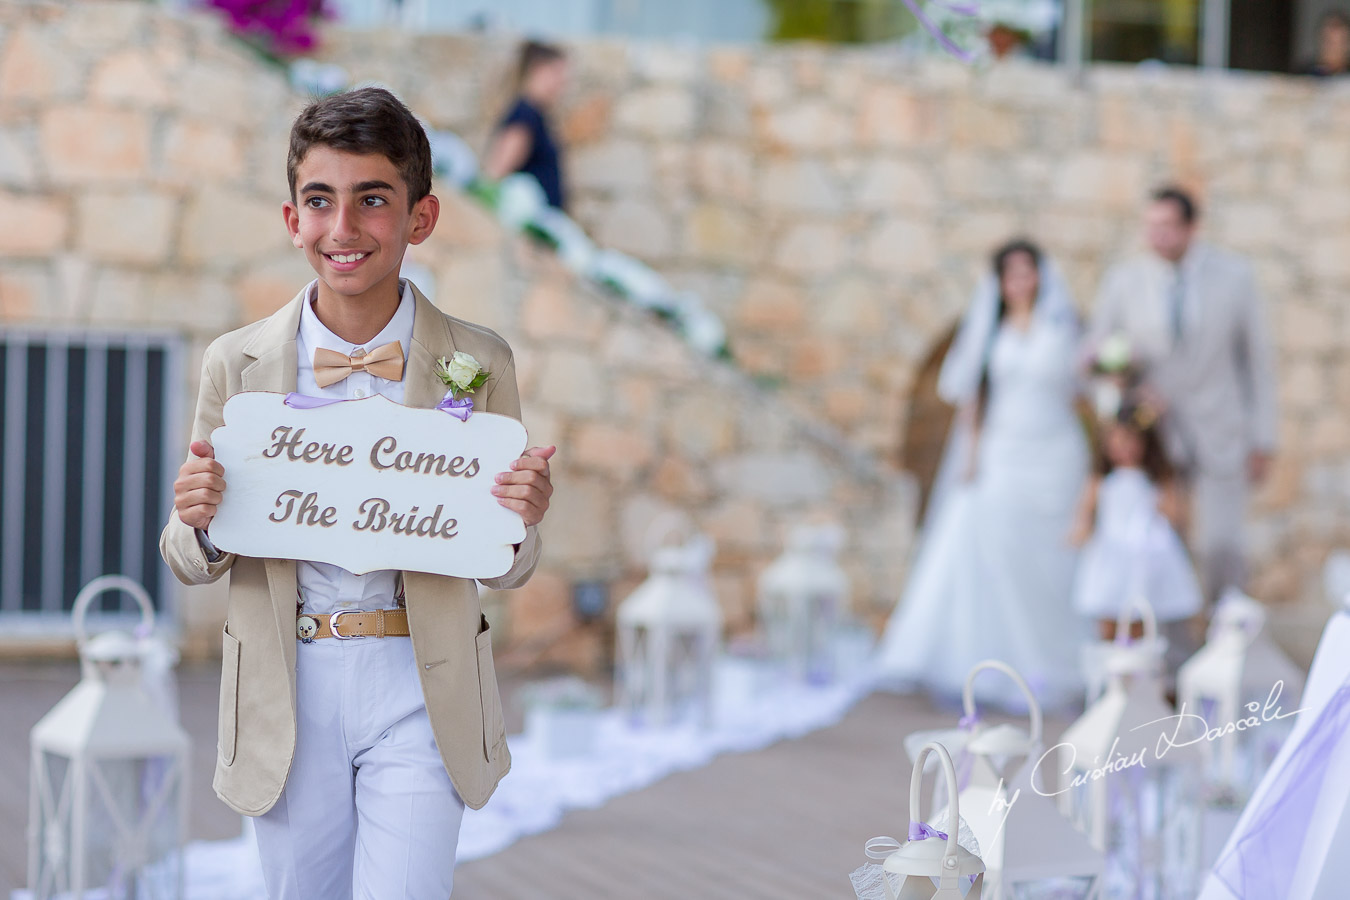 Unique wedding moments captured at Royal Apollonia Hotel in Limassol, Cyprus